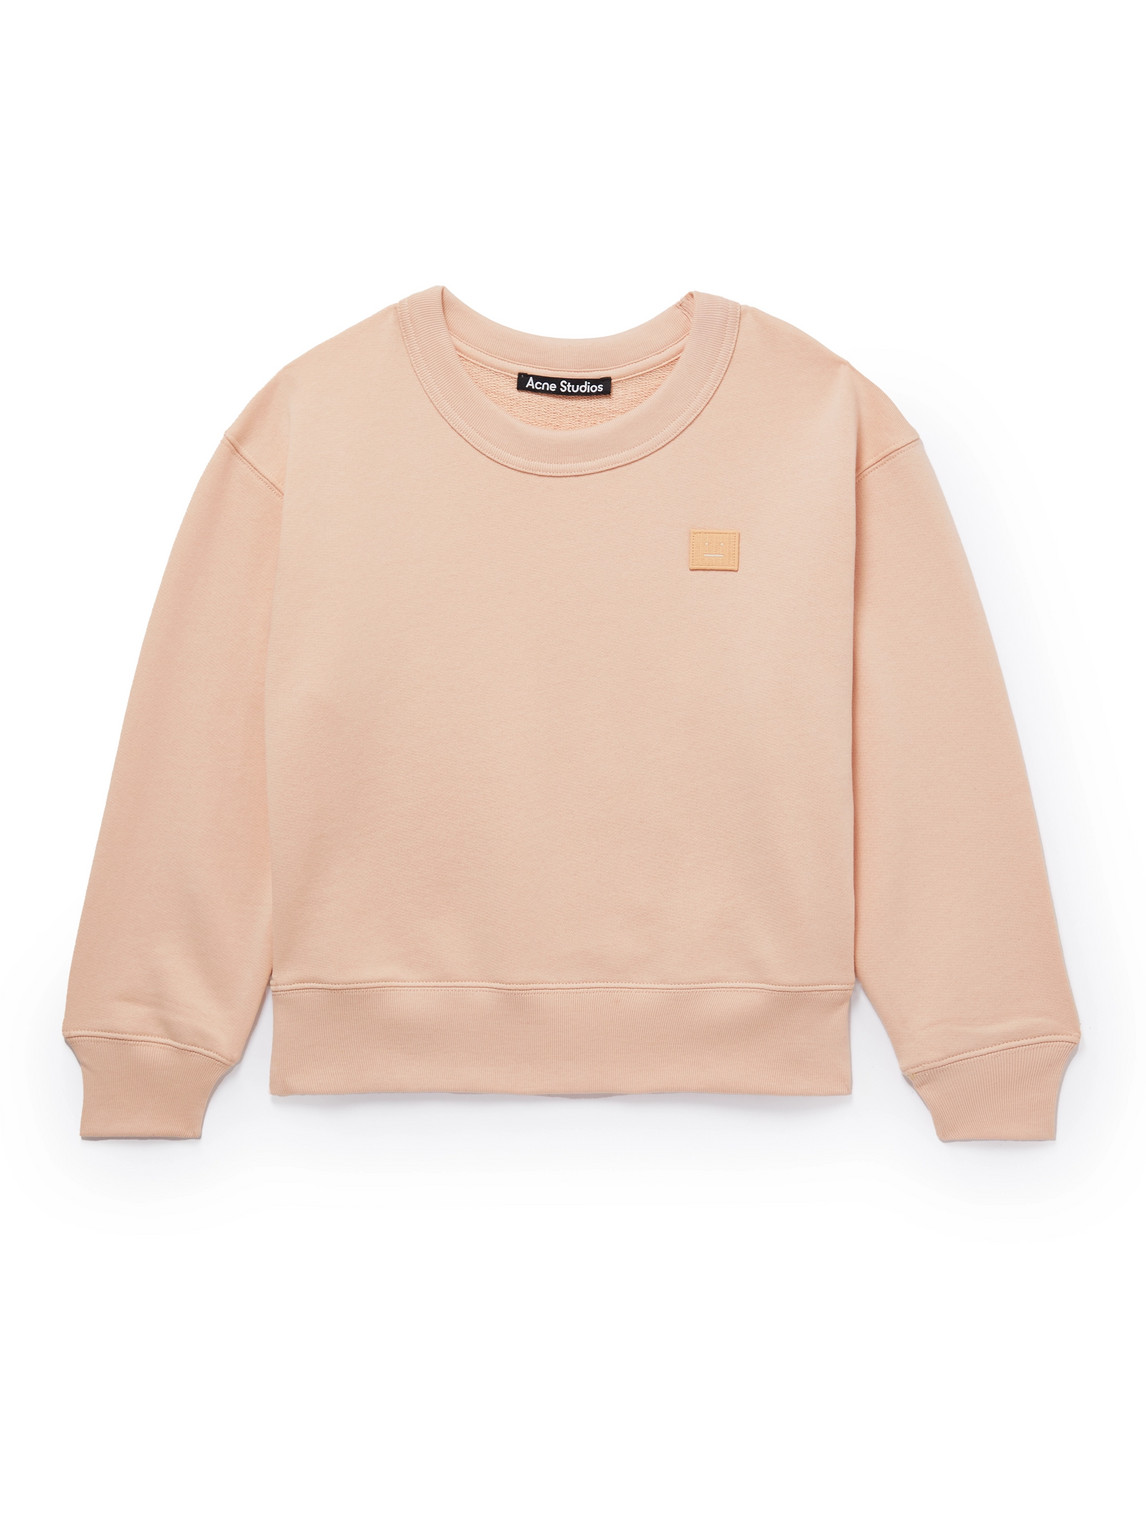 Acne Studios Face Patch Cotton Sweatshirt In Pink